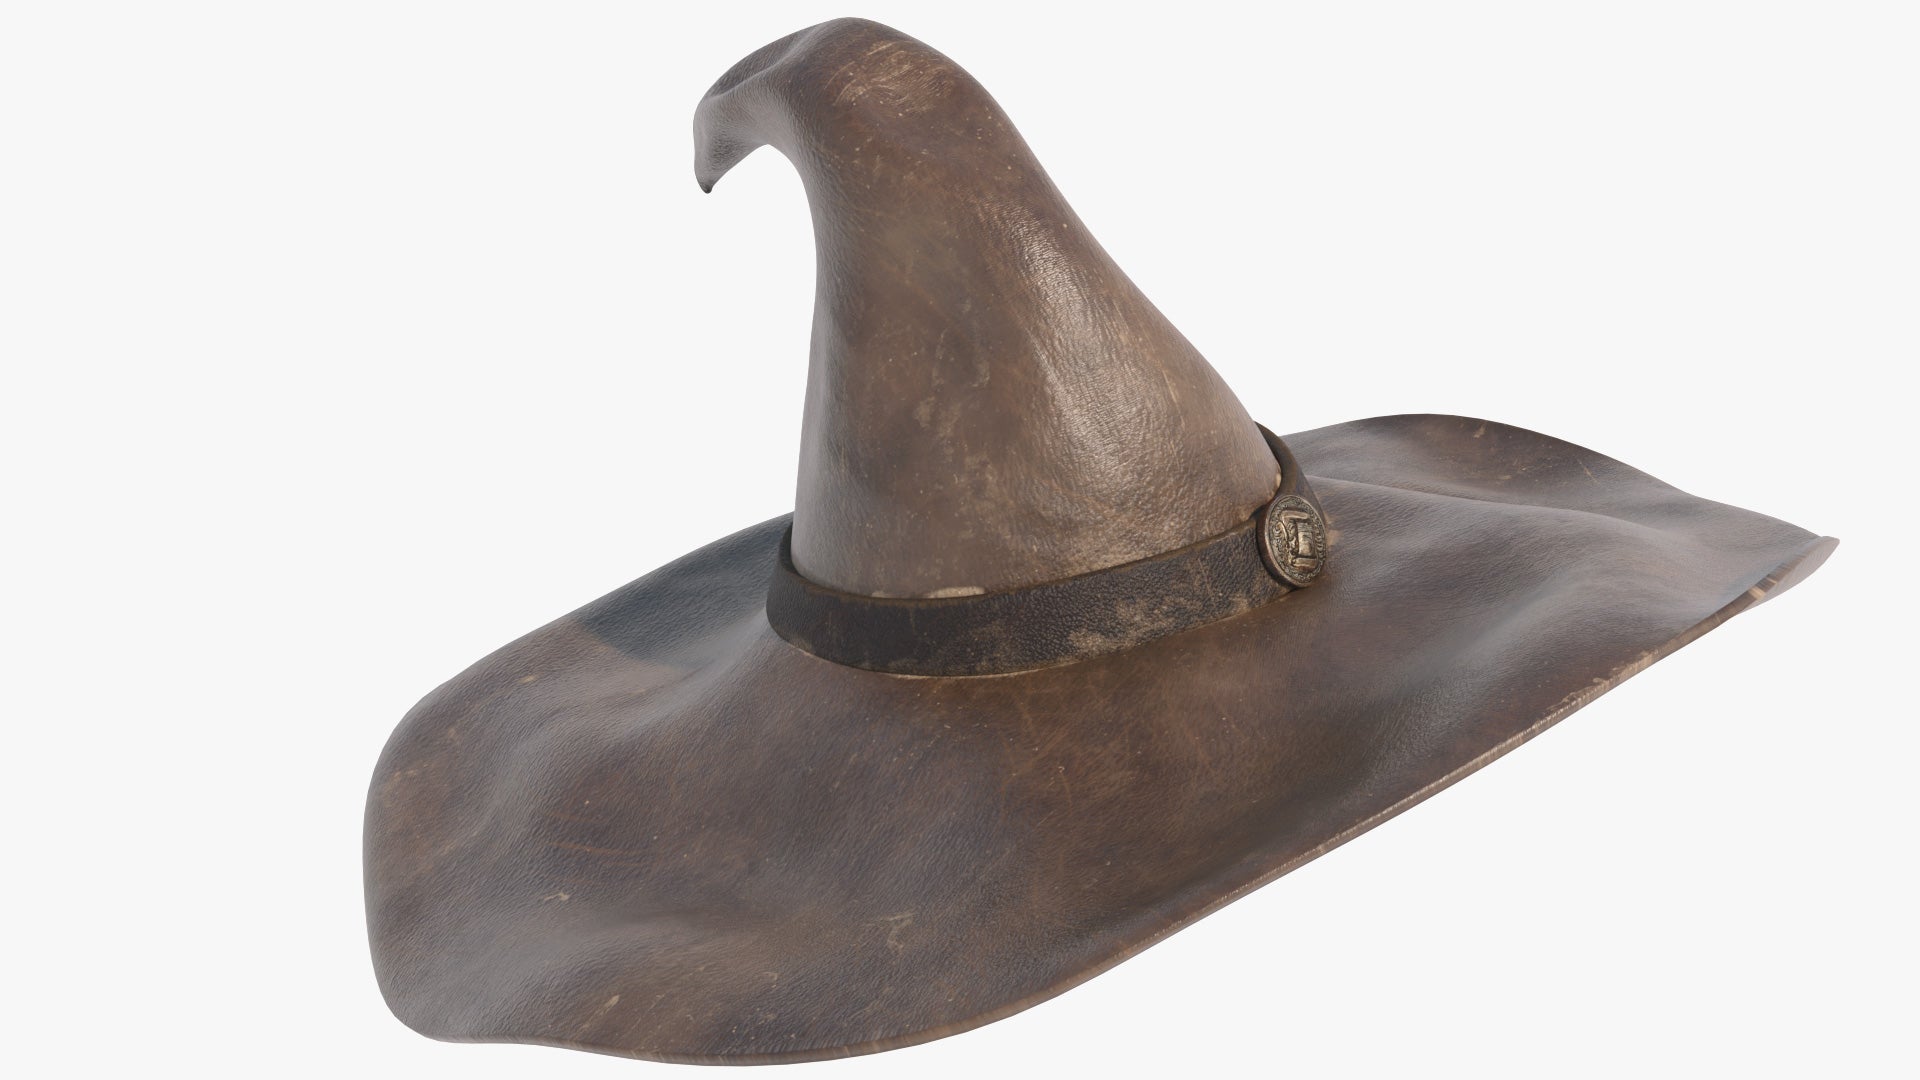 3D model of a medieval witch hat made of worn leather with a belt and an ancient buckle. The model has low polycount, PBR textures and clean UV, perfect for games and the metaverse